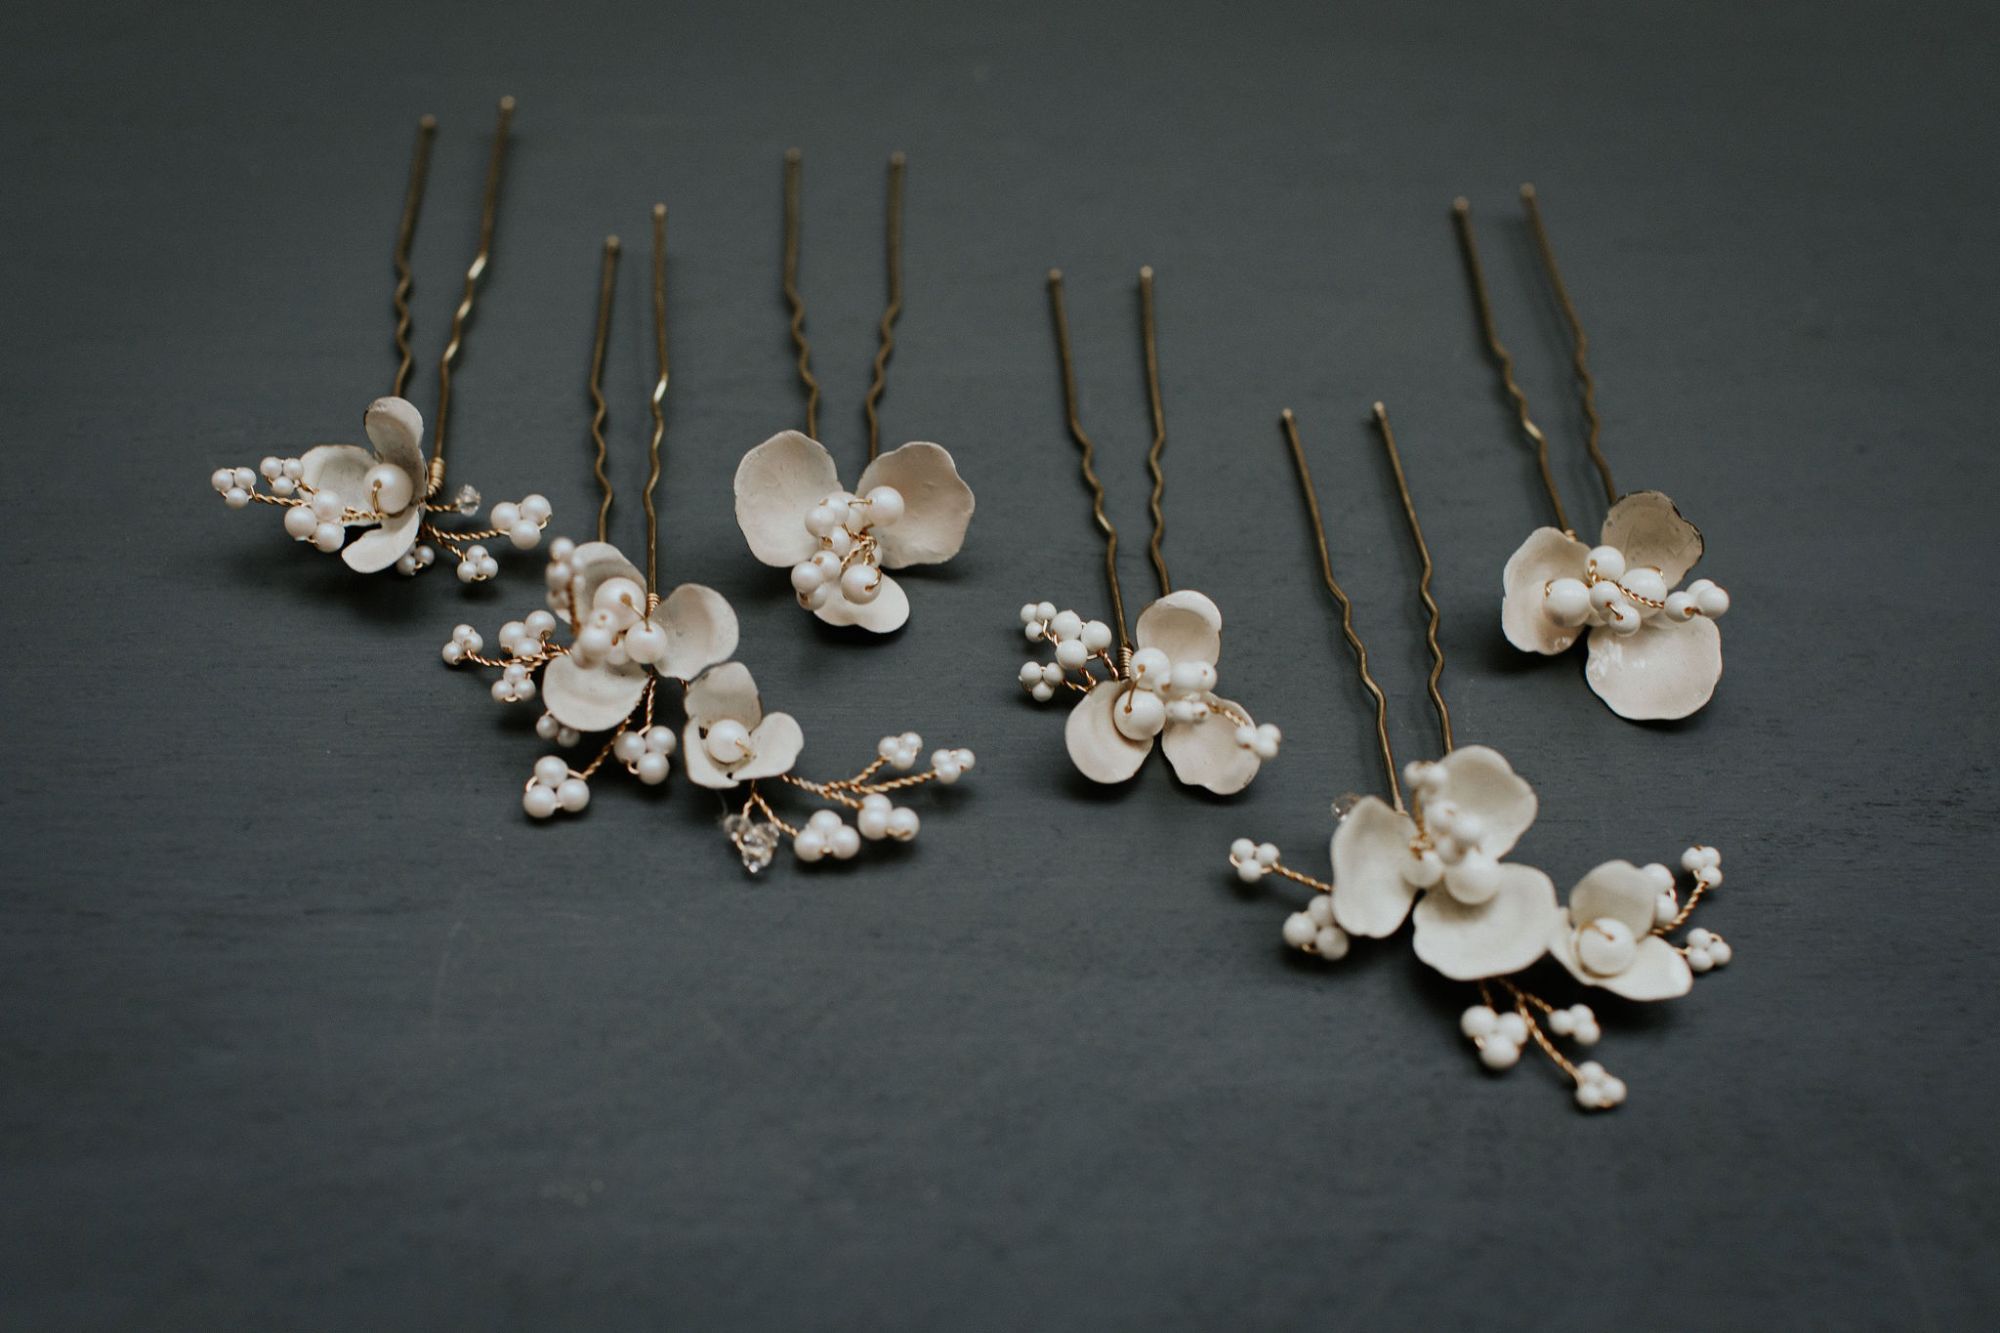 White floral Anemone bridal hair pins handmade by Clare Lloyd Accessories